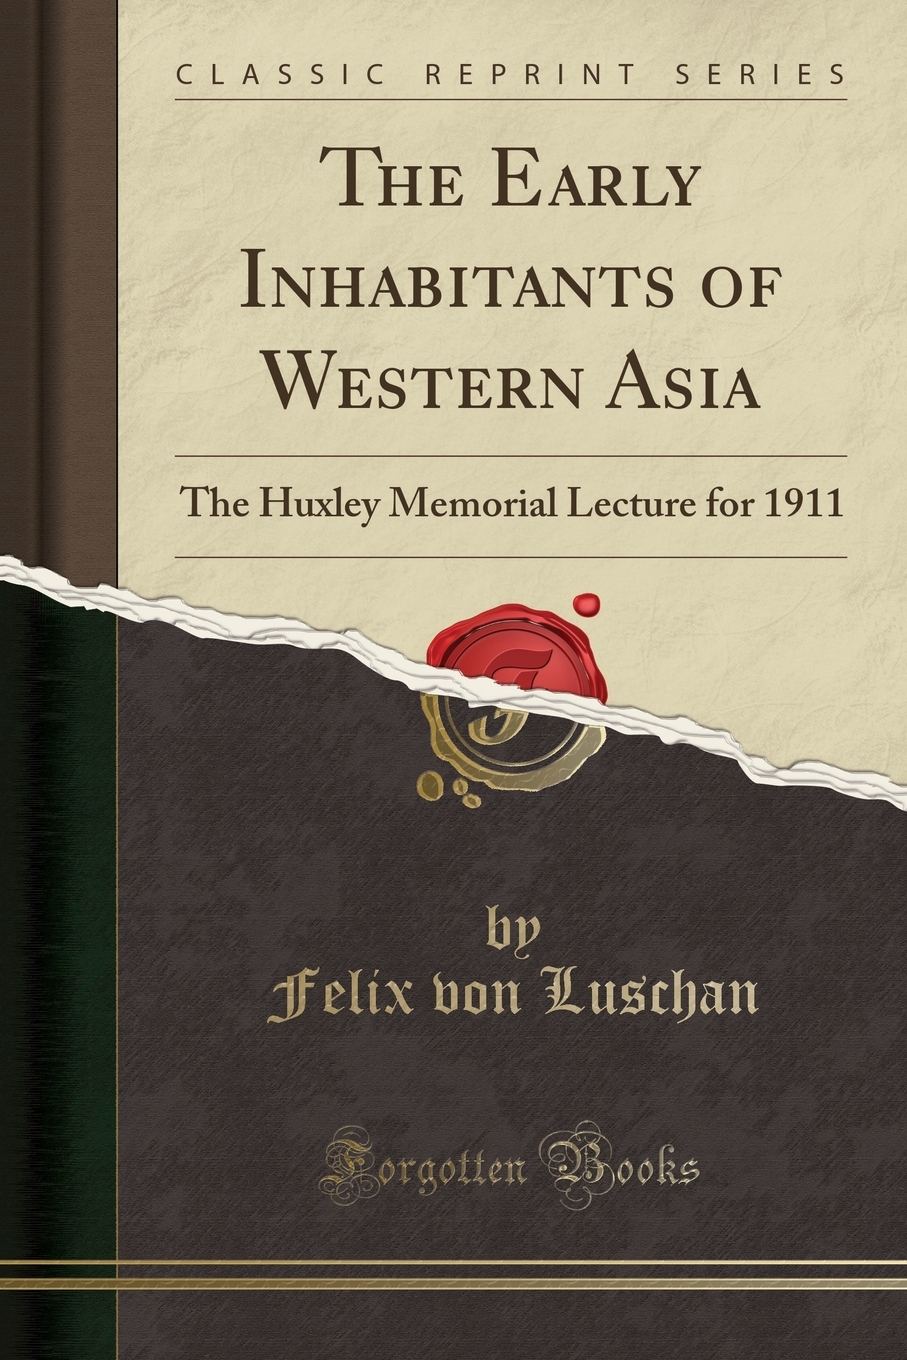 The Early Inhabitants of Western Asia : The Huxley Memorial Lecture for 1911 (Classic Reprint) - image 1 of 1